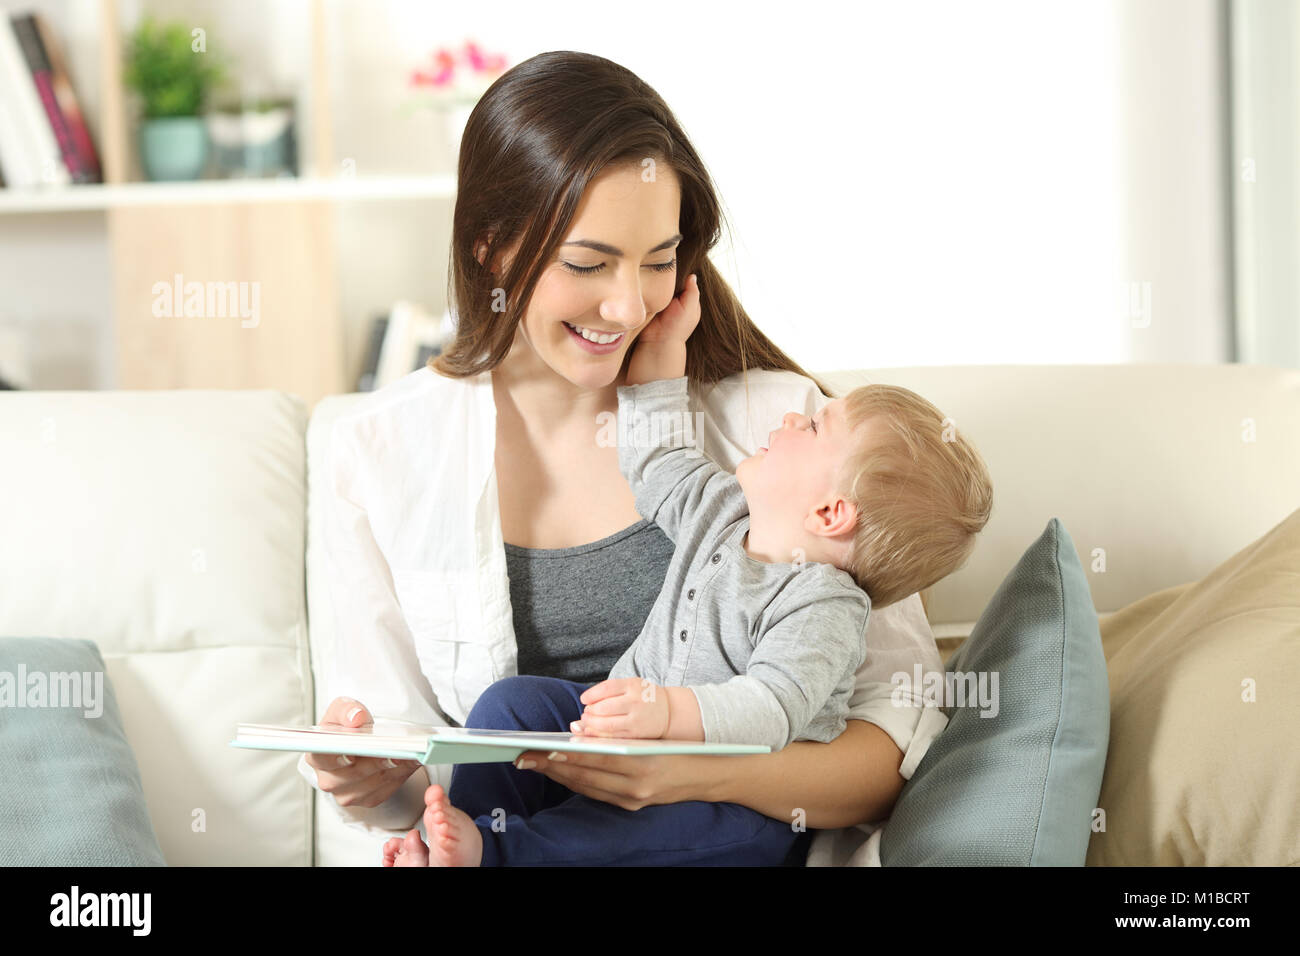 Mother and son looking each other holding a book sitting on a couch in the living room at home Stock Photo